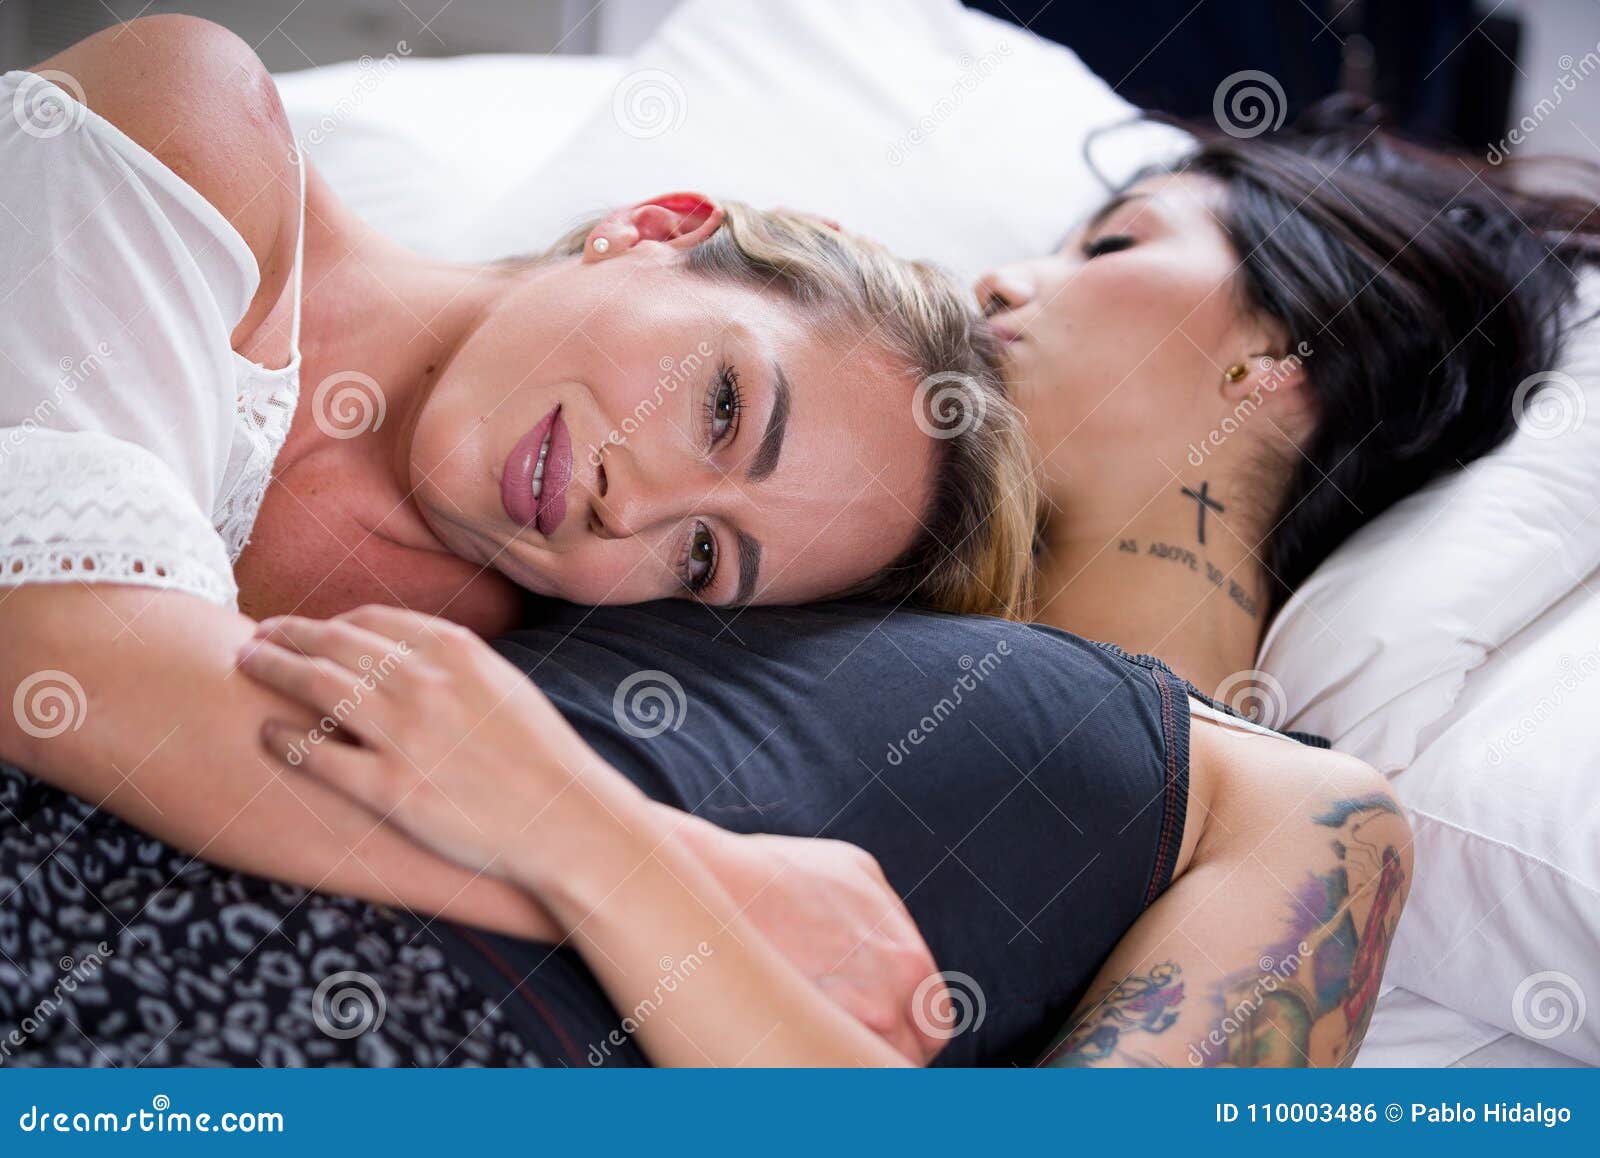 Lesbians Lovers in Bed at Morning, Blonde Girl is Sleeping Over the Brunette Girl Chest, in a White Background Stock Photo